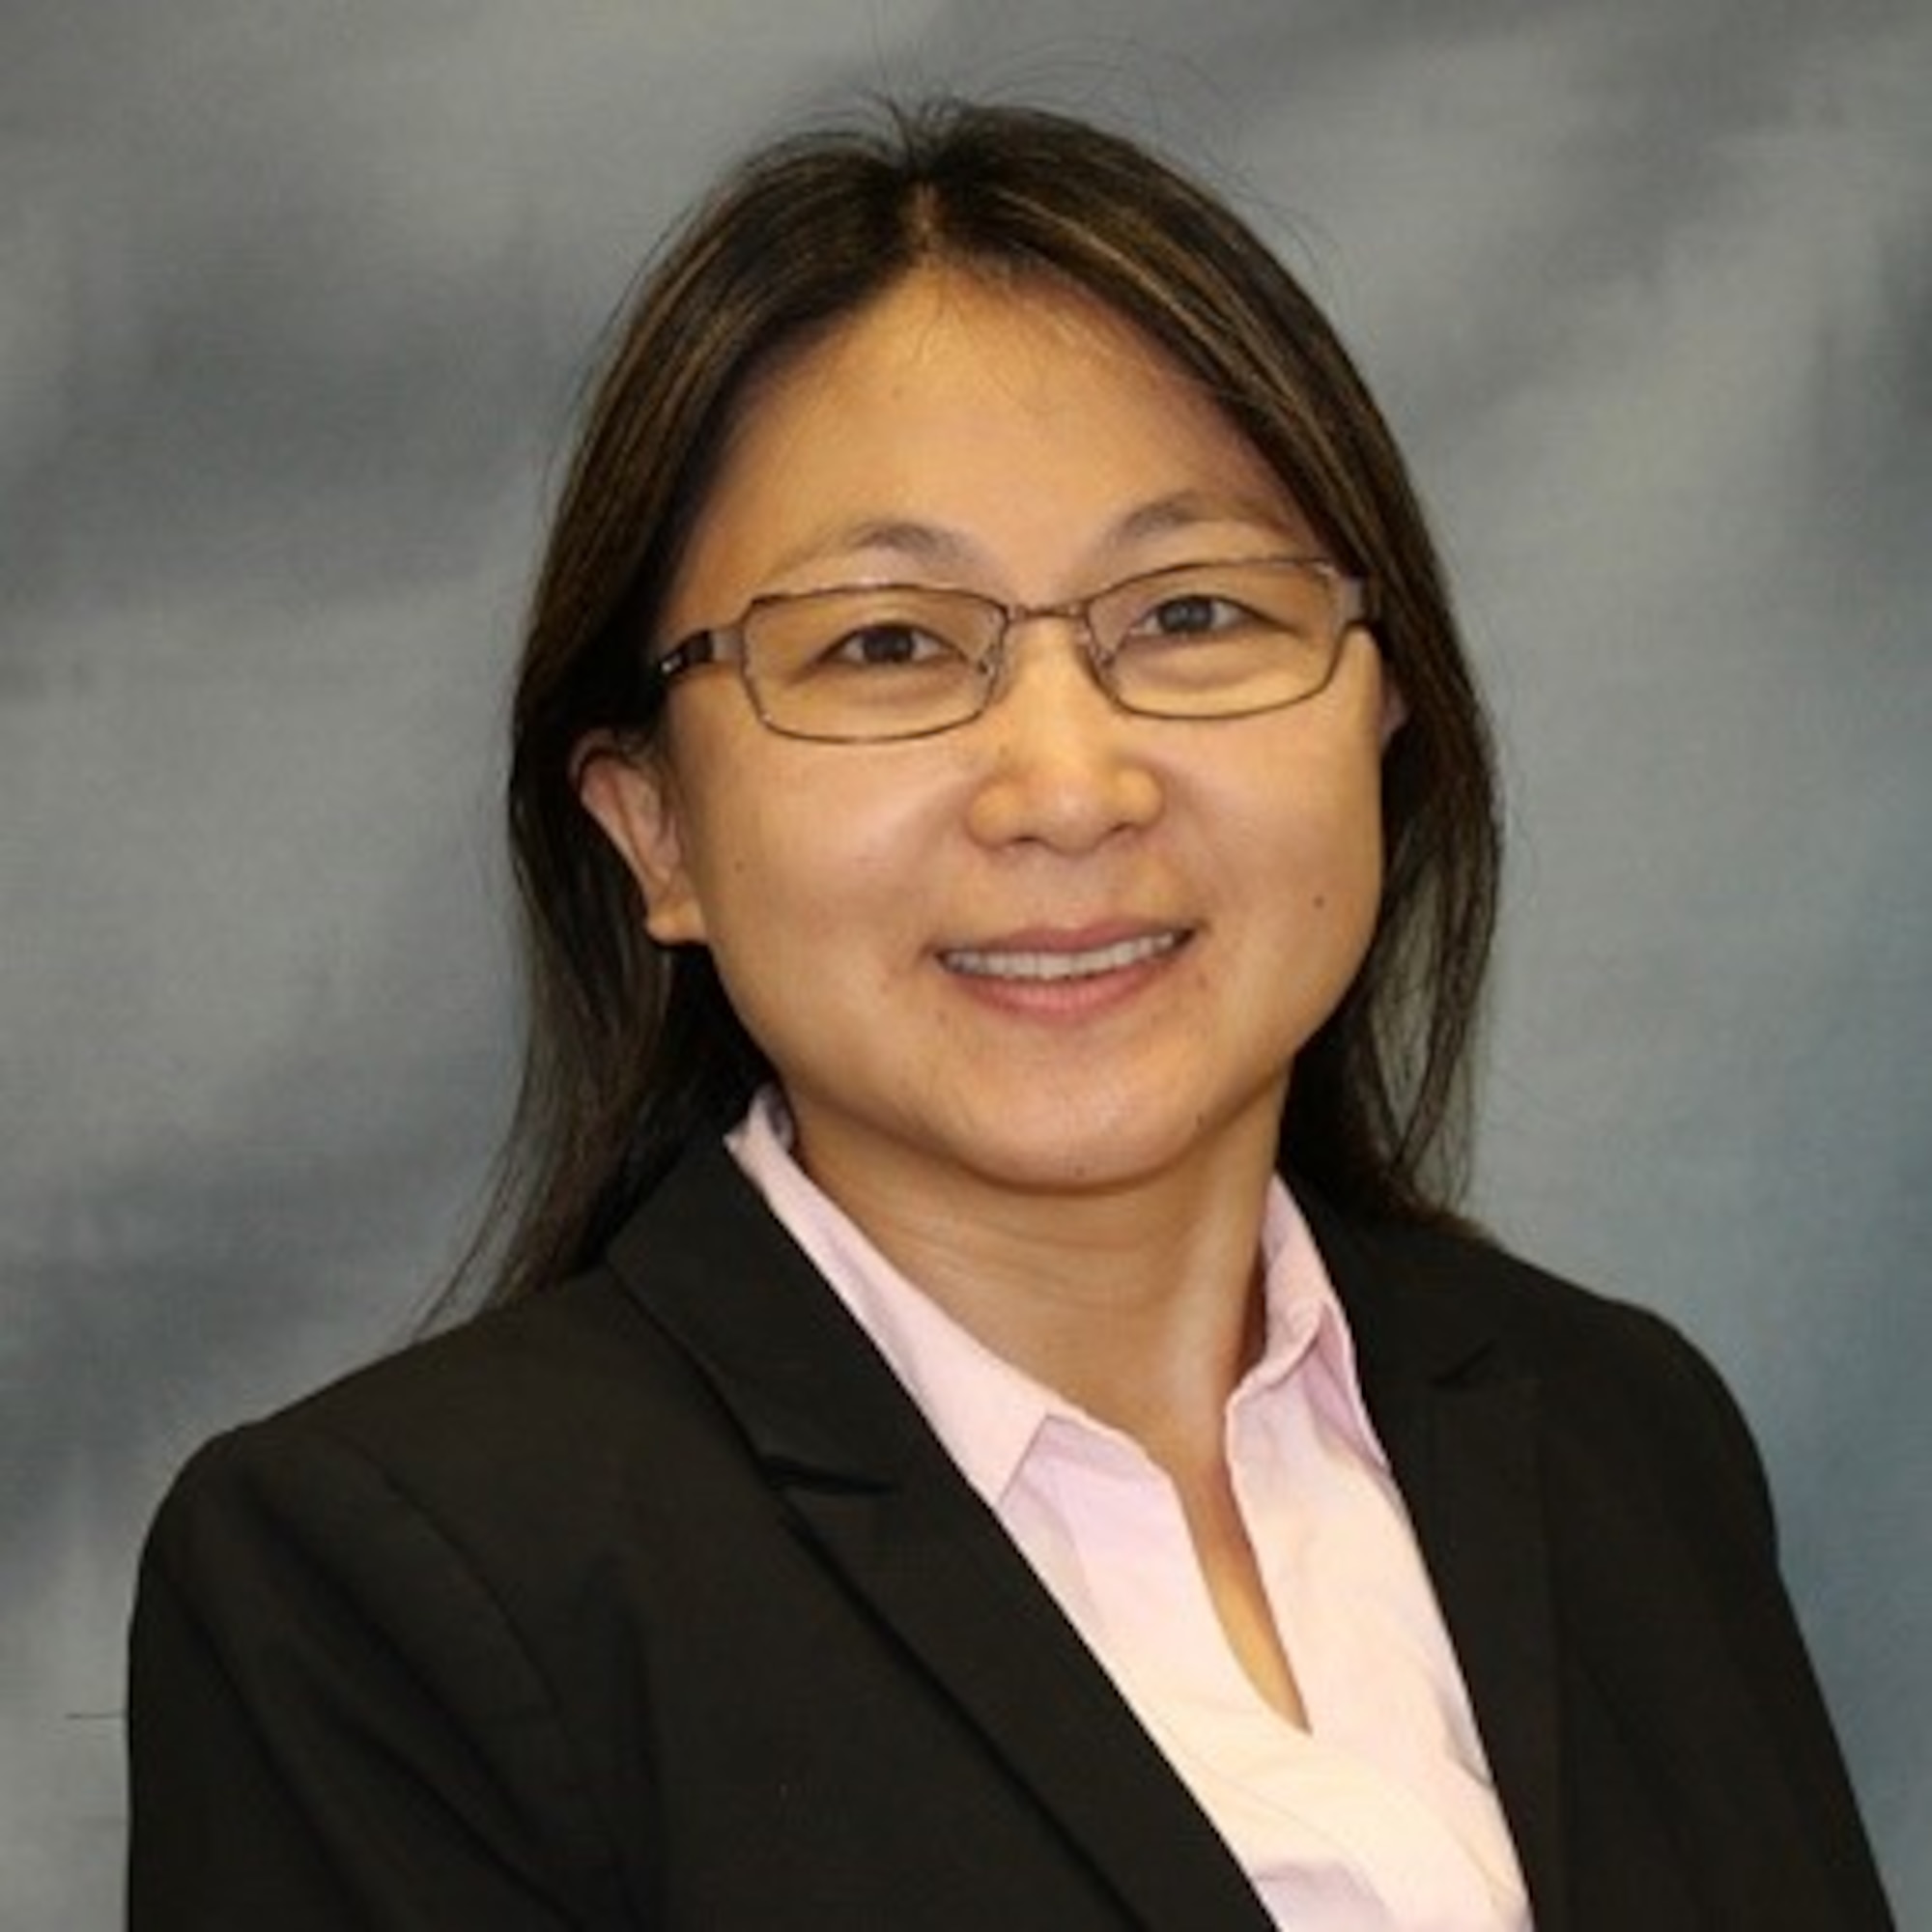 Dr. Cheryl Xu, a researcher at the time of the technology creation, was an Associate Professor at Florida State University, now located at North Carolina State University. (Courtesy photo)